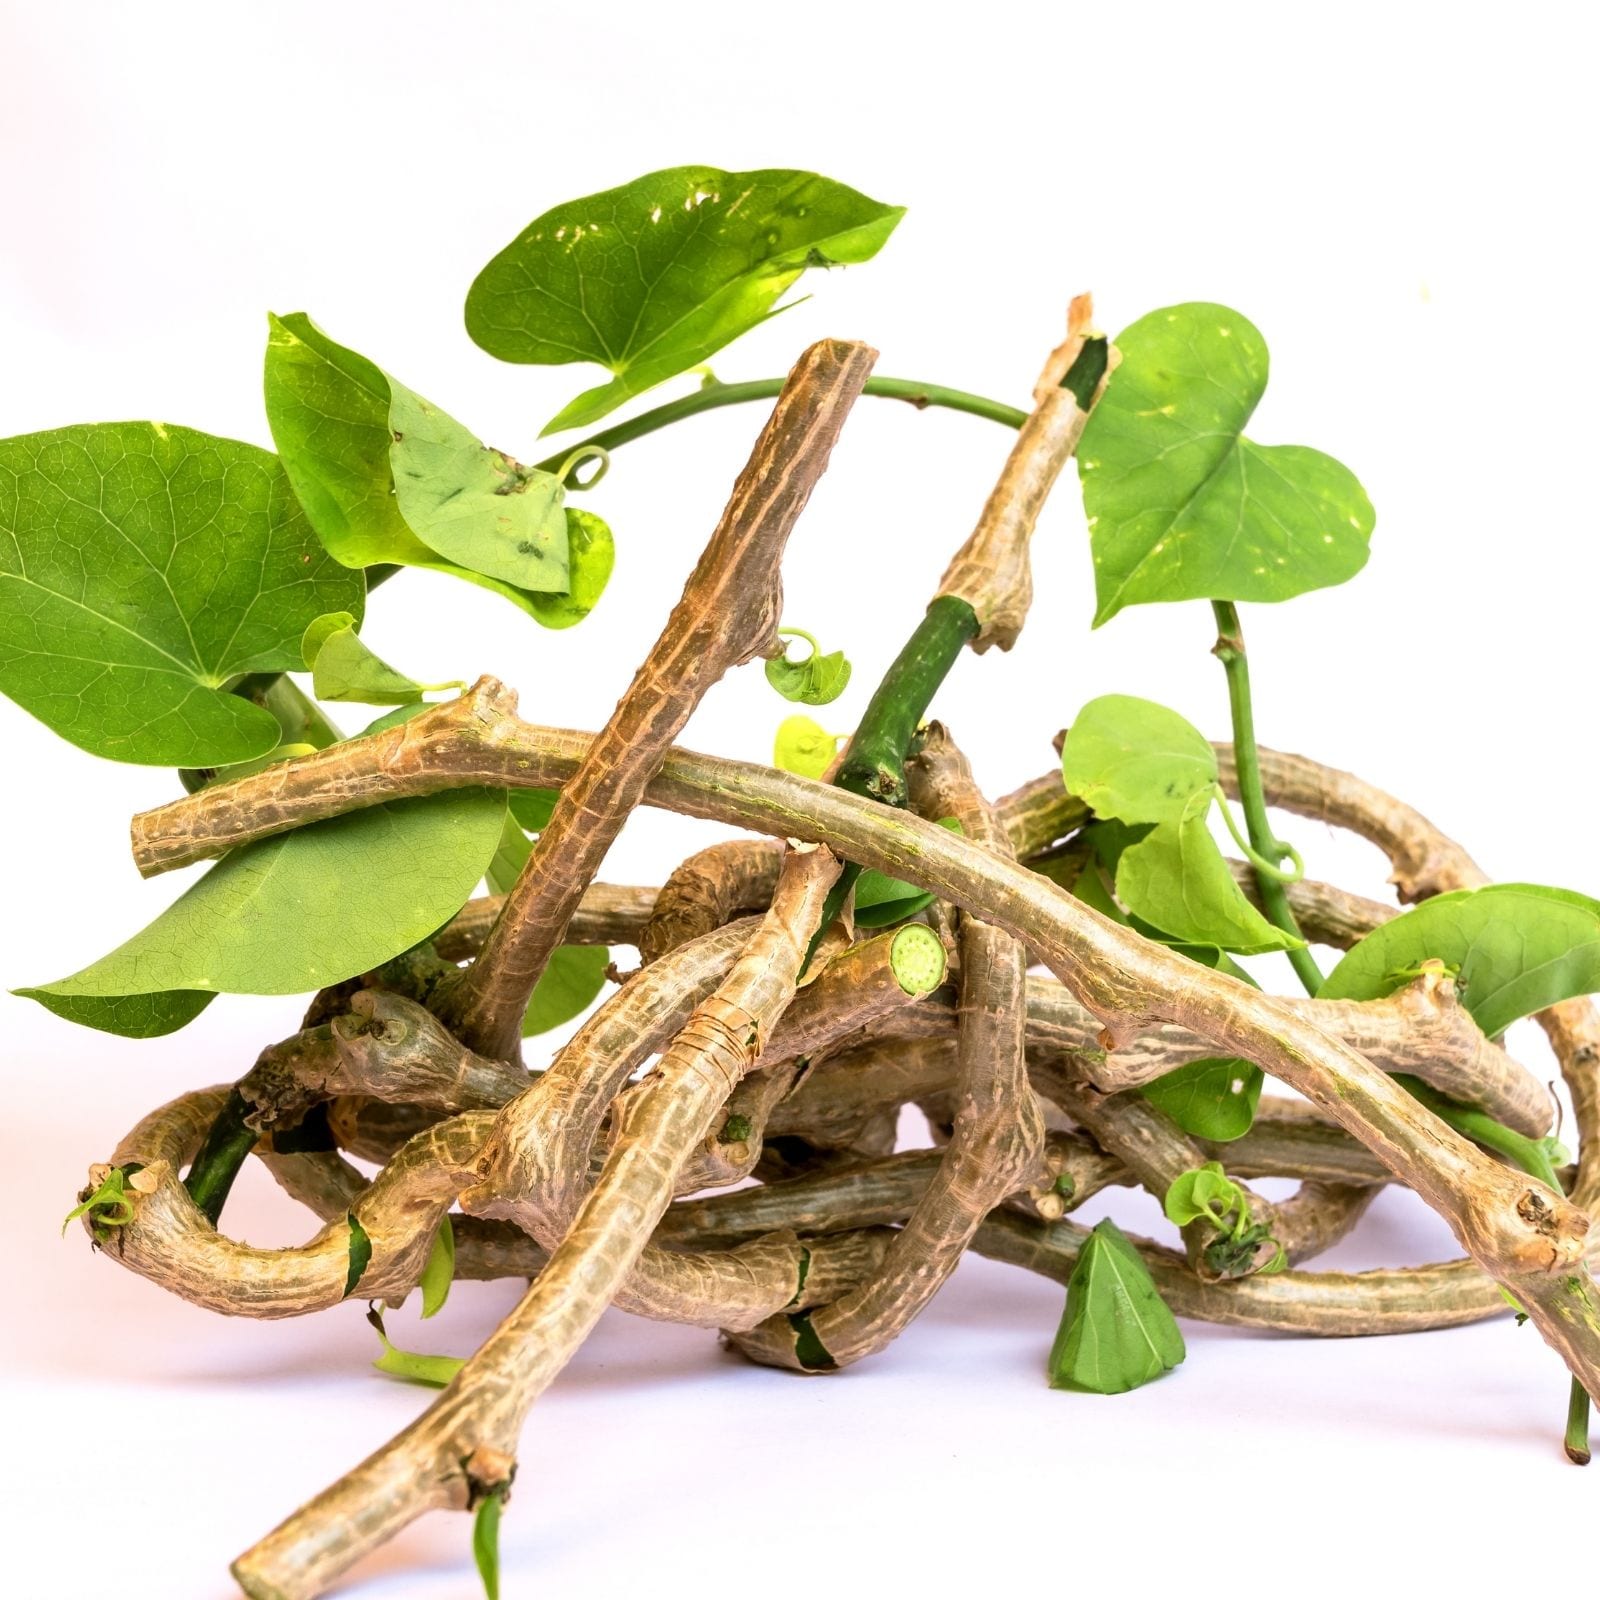 Indian Scientists Sequence The Genome Of Ayurvedic Medicinal Plant ...